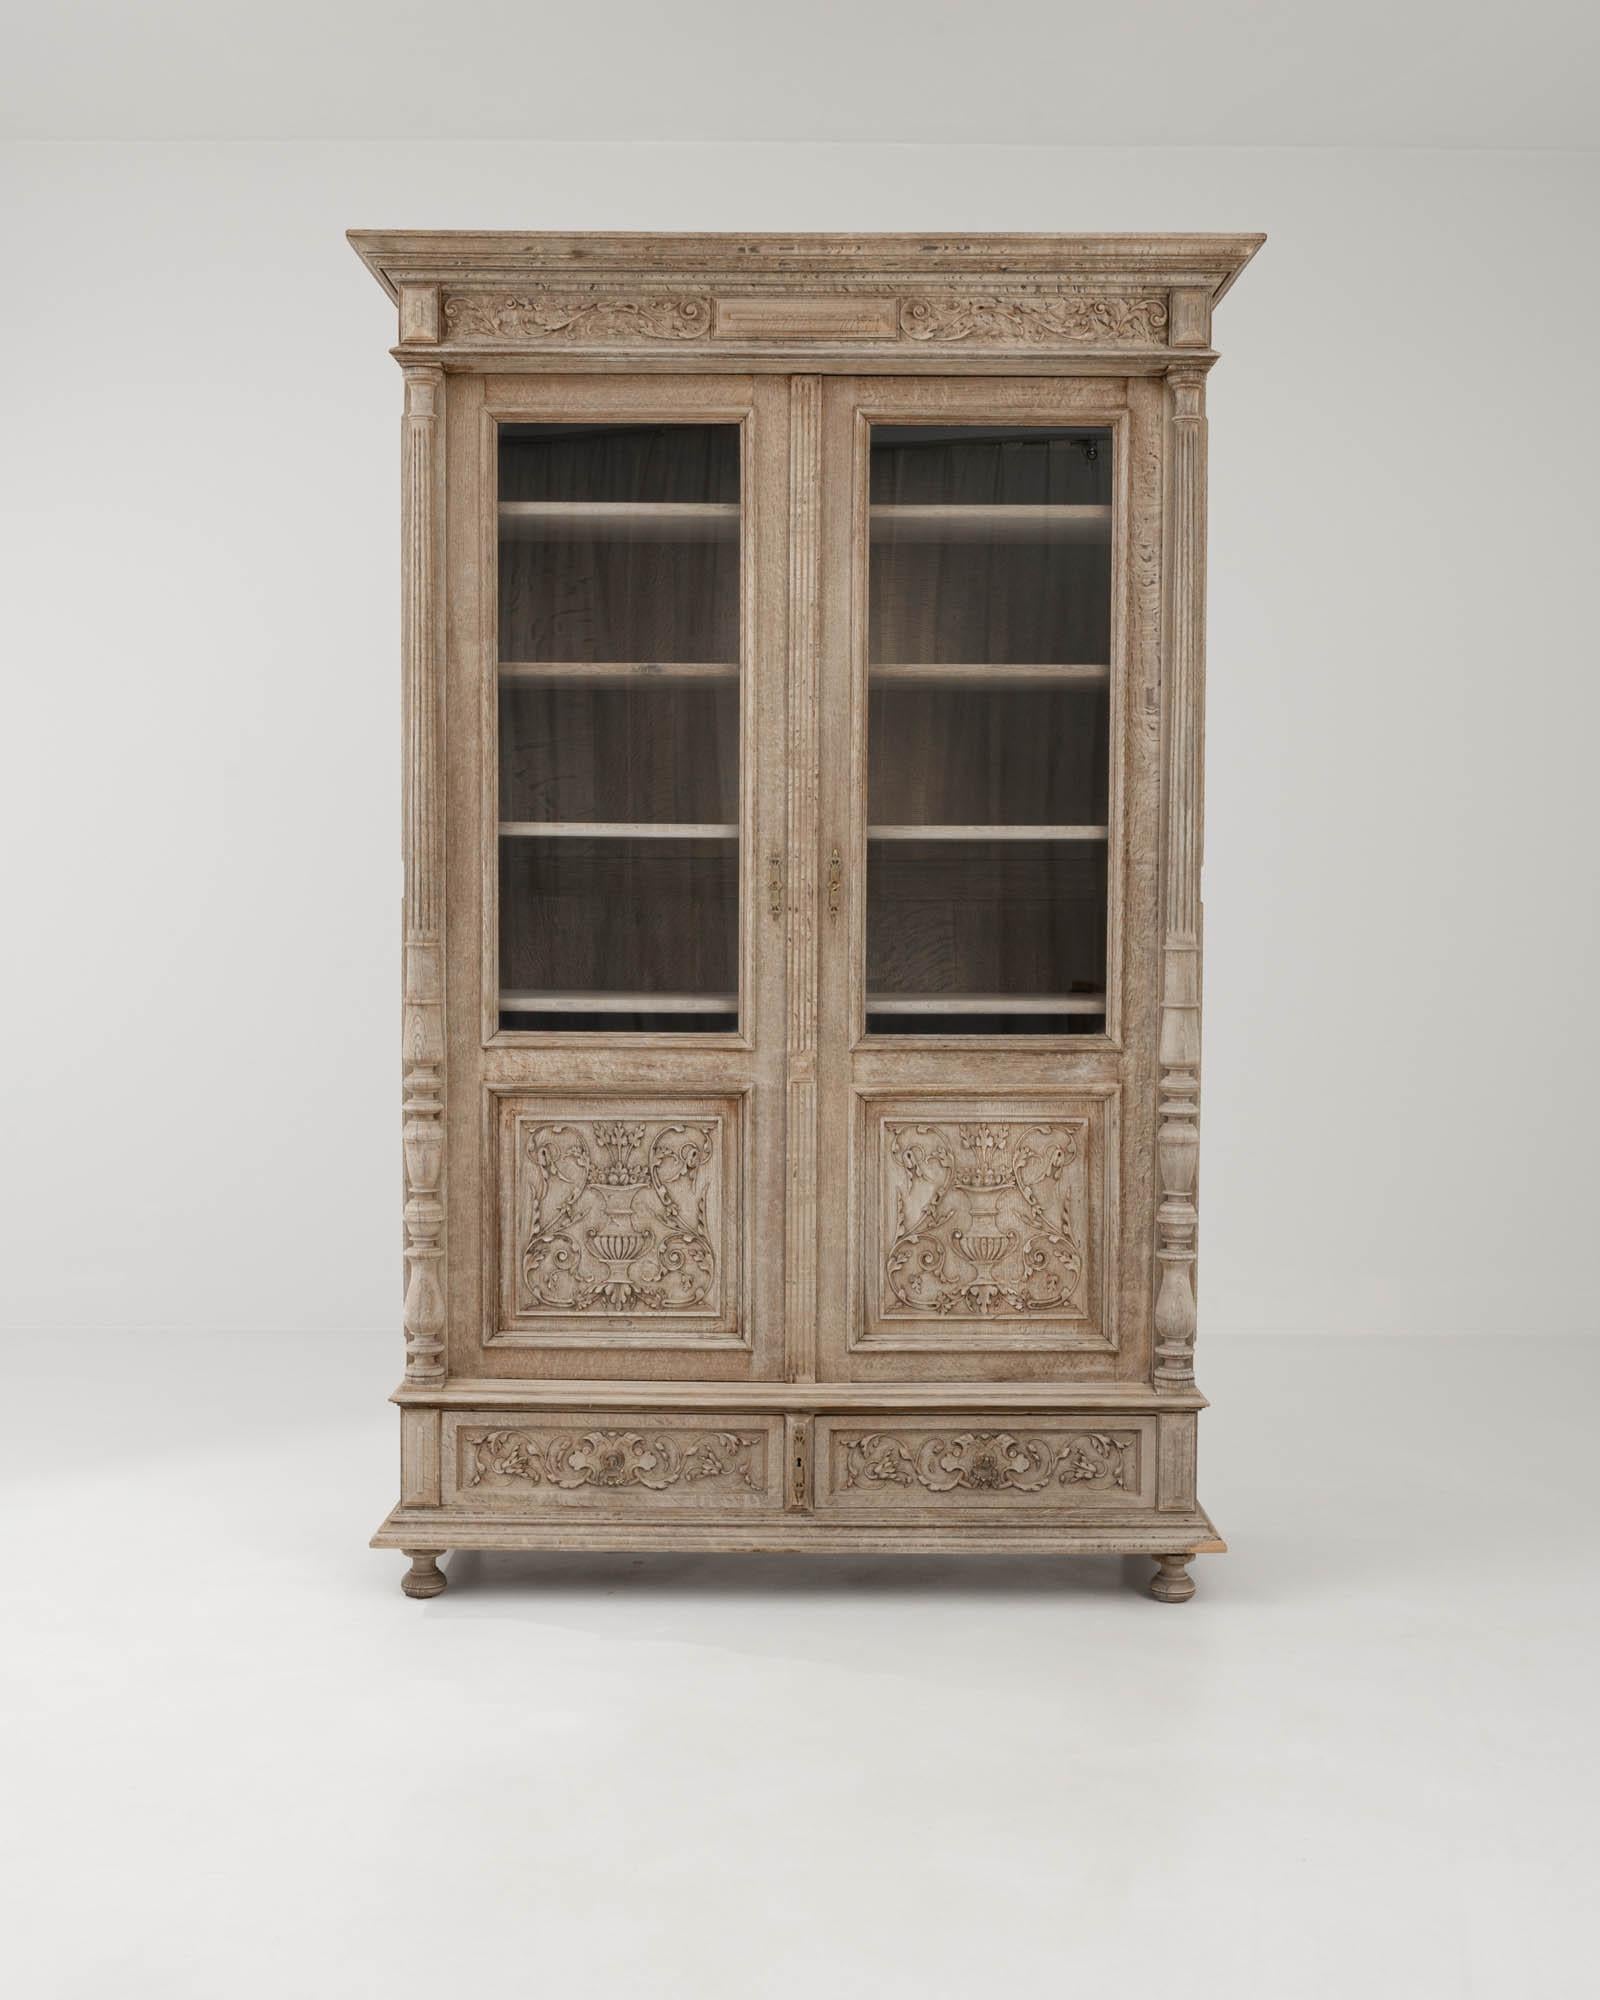 Combining the clean symmetries of Neoclassical style with the verdant excesses of the Rococo aesthetic, this ornate oak vitrine offers a majestic antique centerpiece. Hand-crafted in Belgium in the 1800s, the panels of the cabinet are carved with